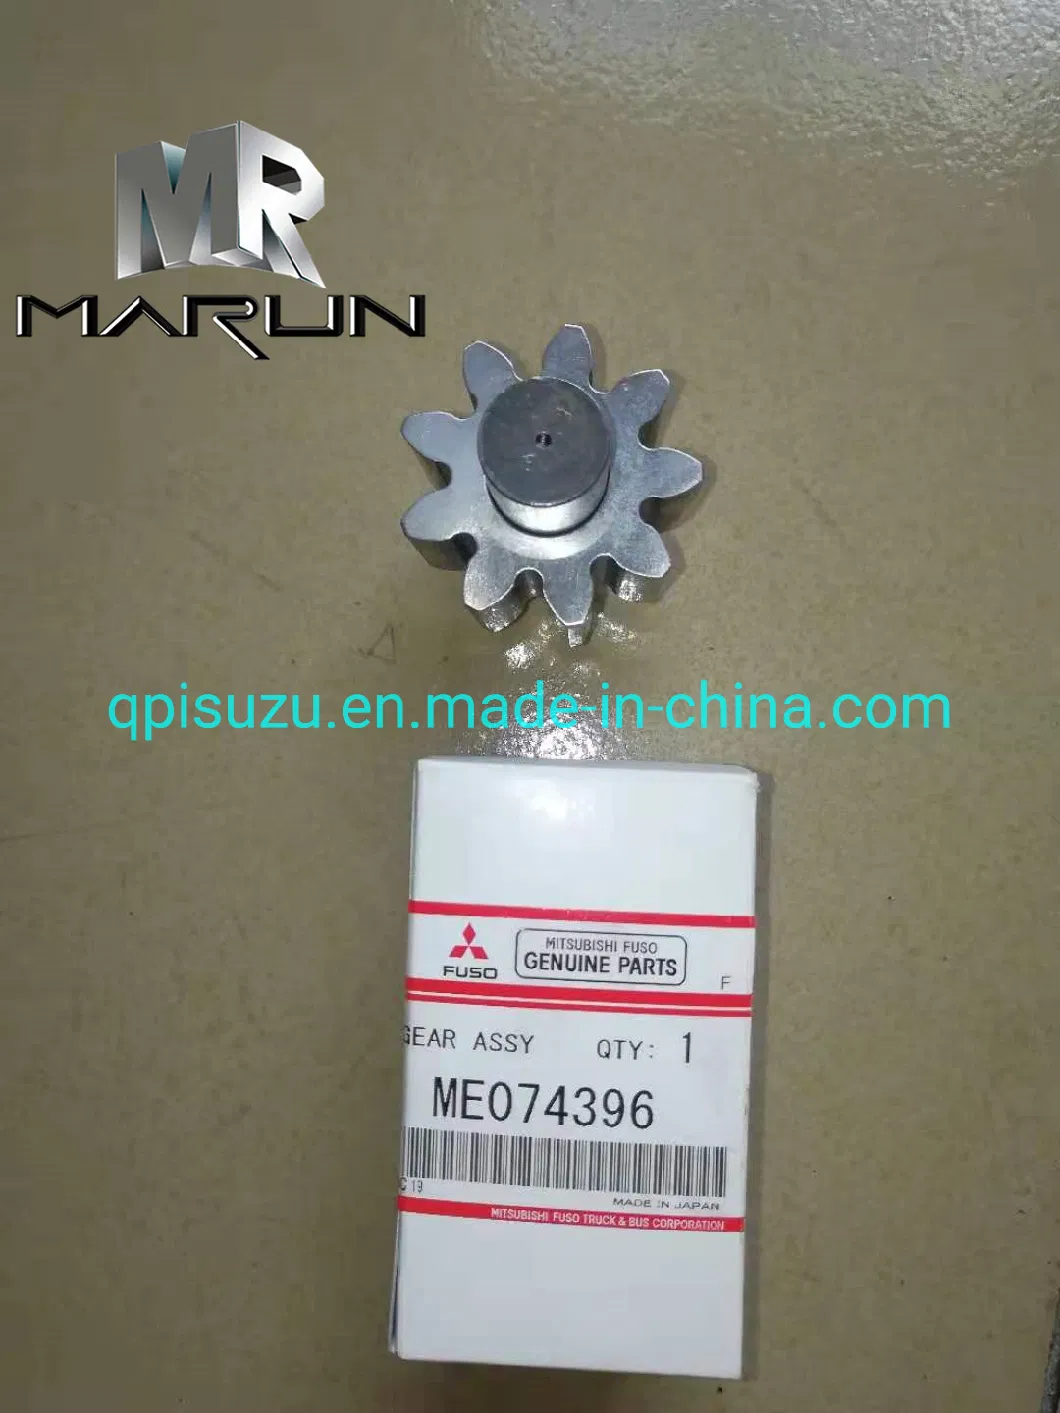 Gear Assembly Me074396 6m60 for HD1430r Machine Use